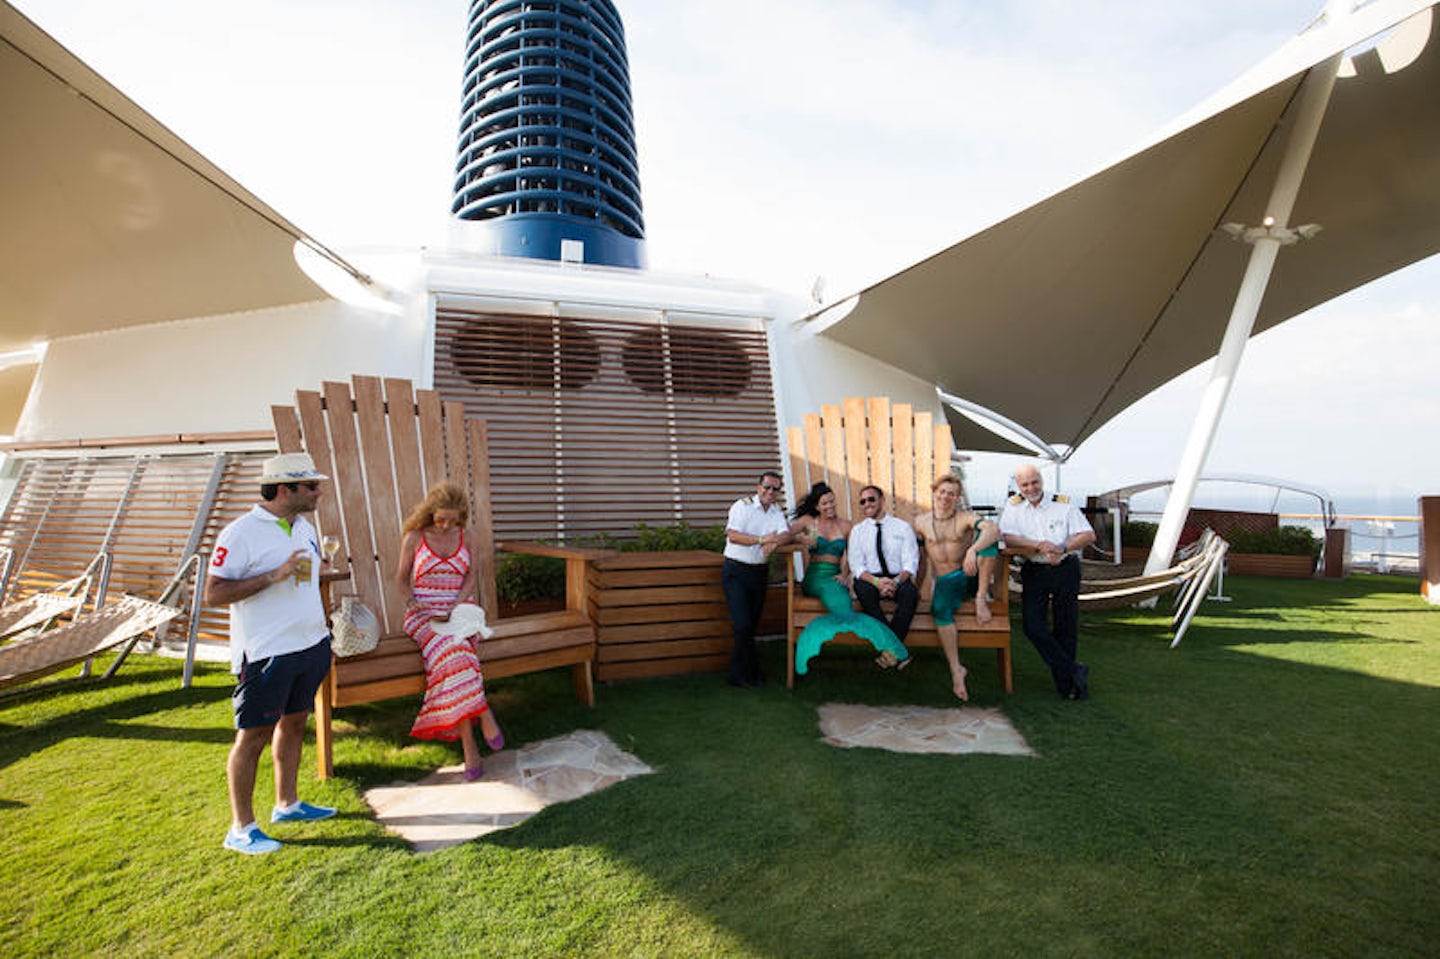 The Lawn Club on Celebrity Reflection